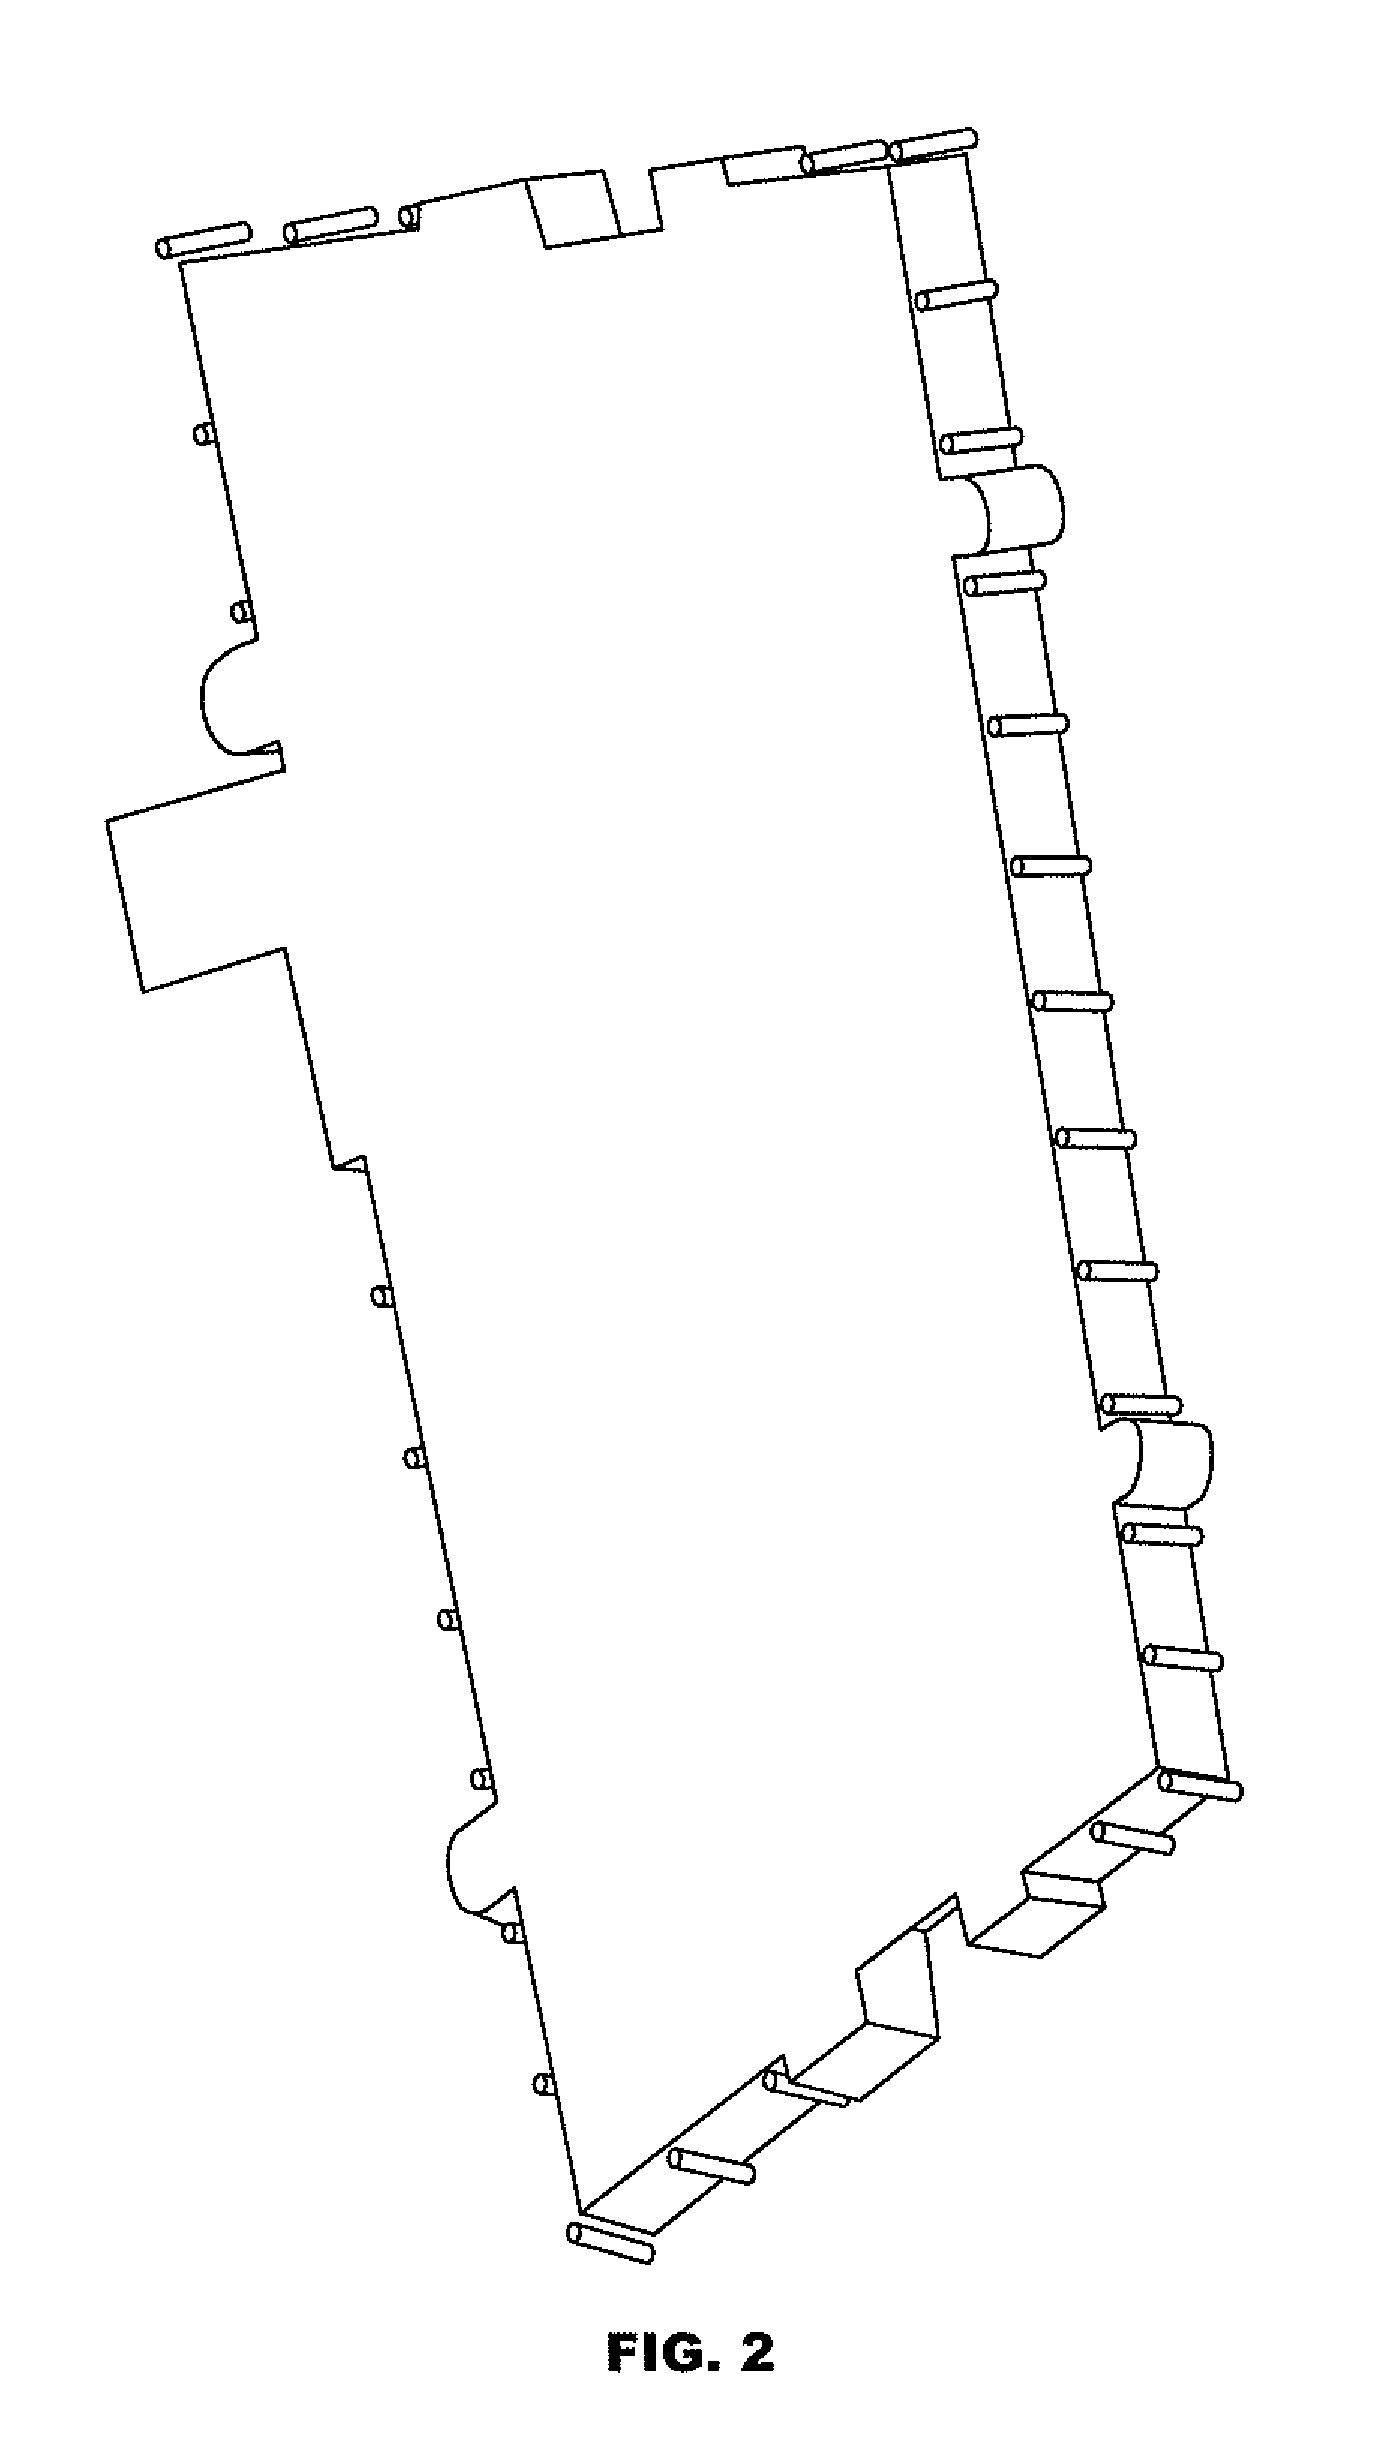 Method for generating 3D building models from a set of floor plans